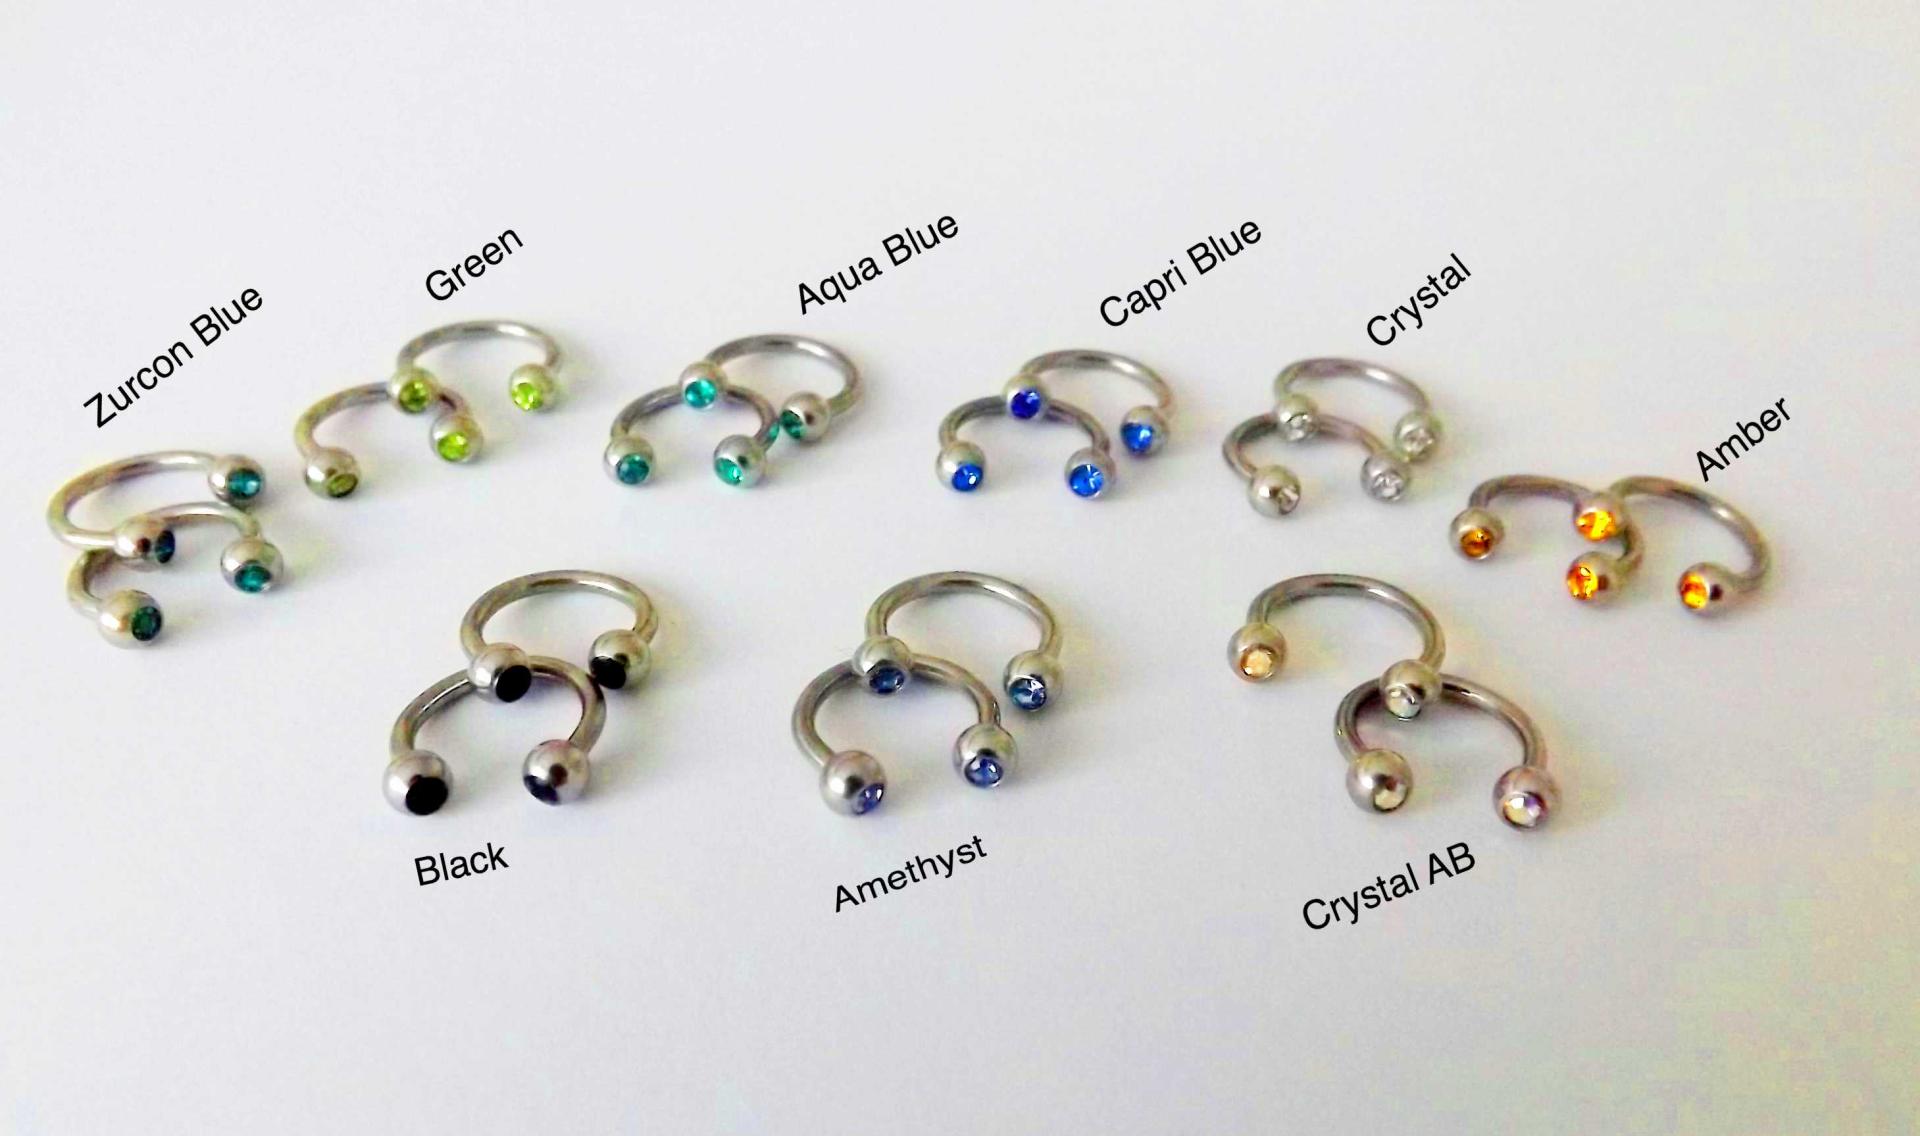 Circular Barbell horseshoe Body Jewelry With Crystal Gems